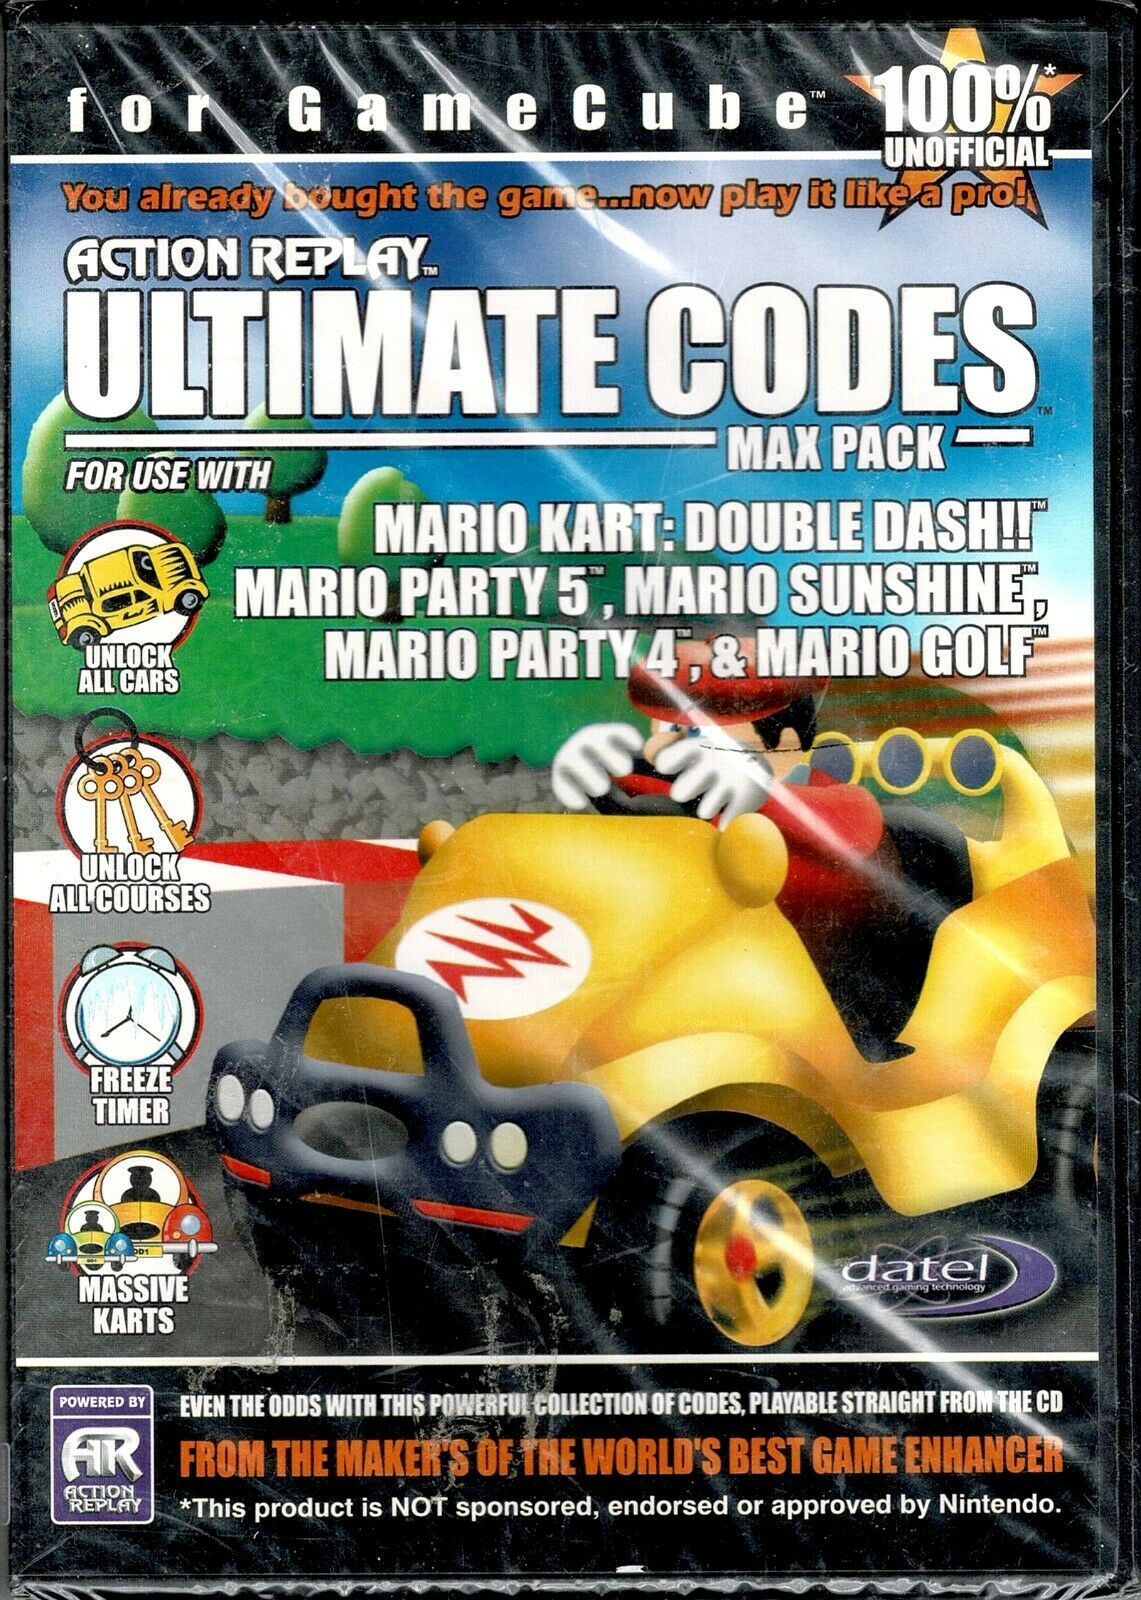 Action Replay Ultimate Codes Max Pack (Gamecube)